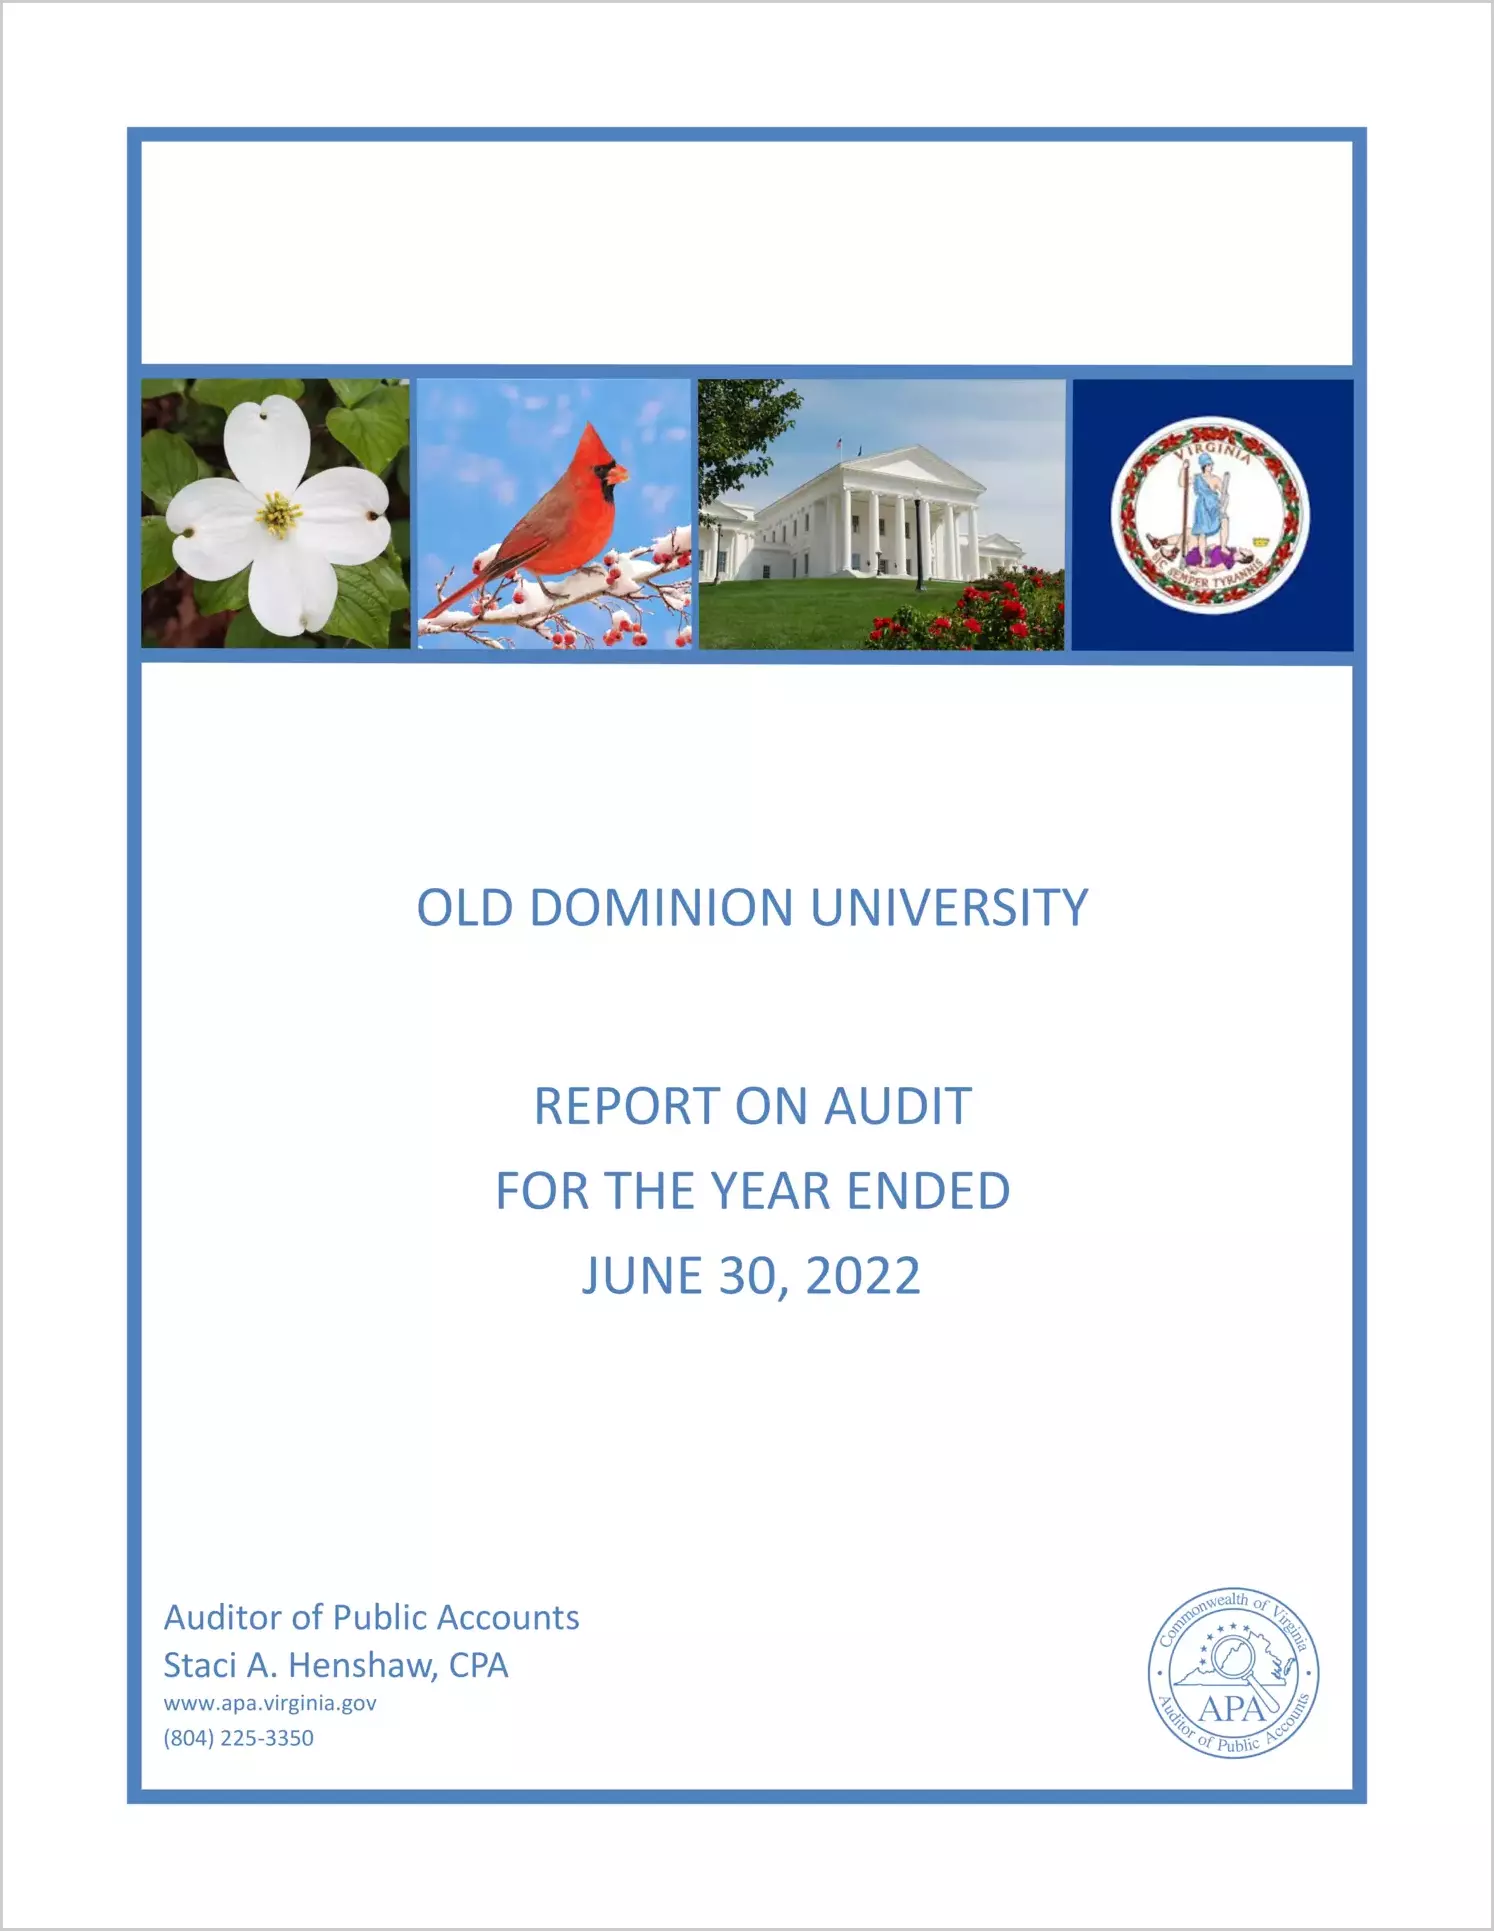 Old Dominion University for the year ended June 30, 2022